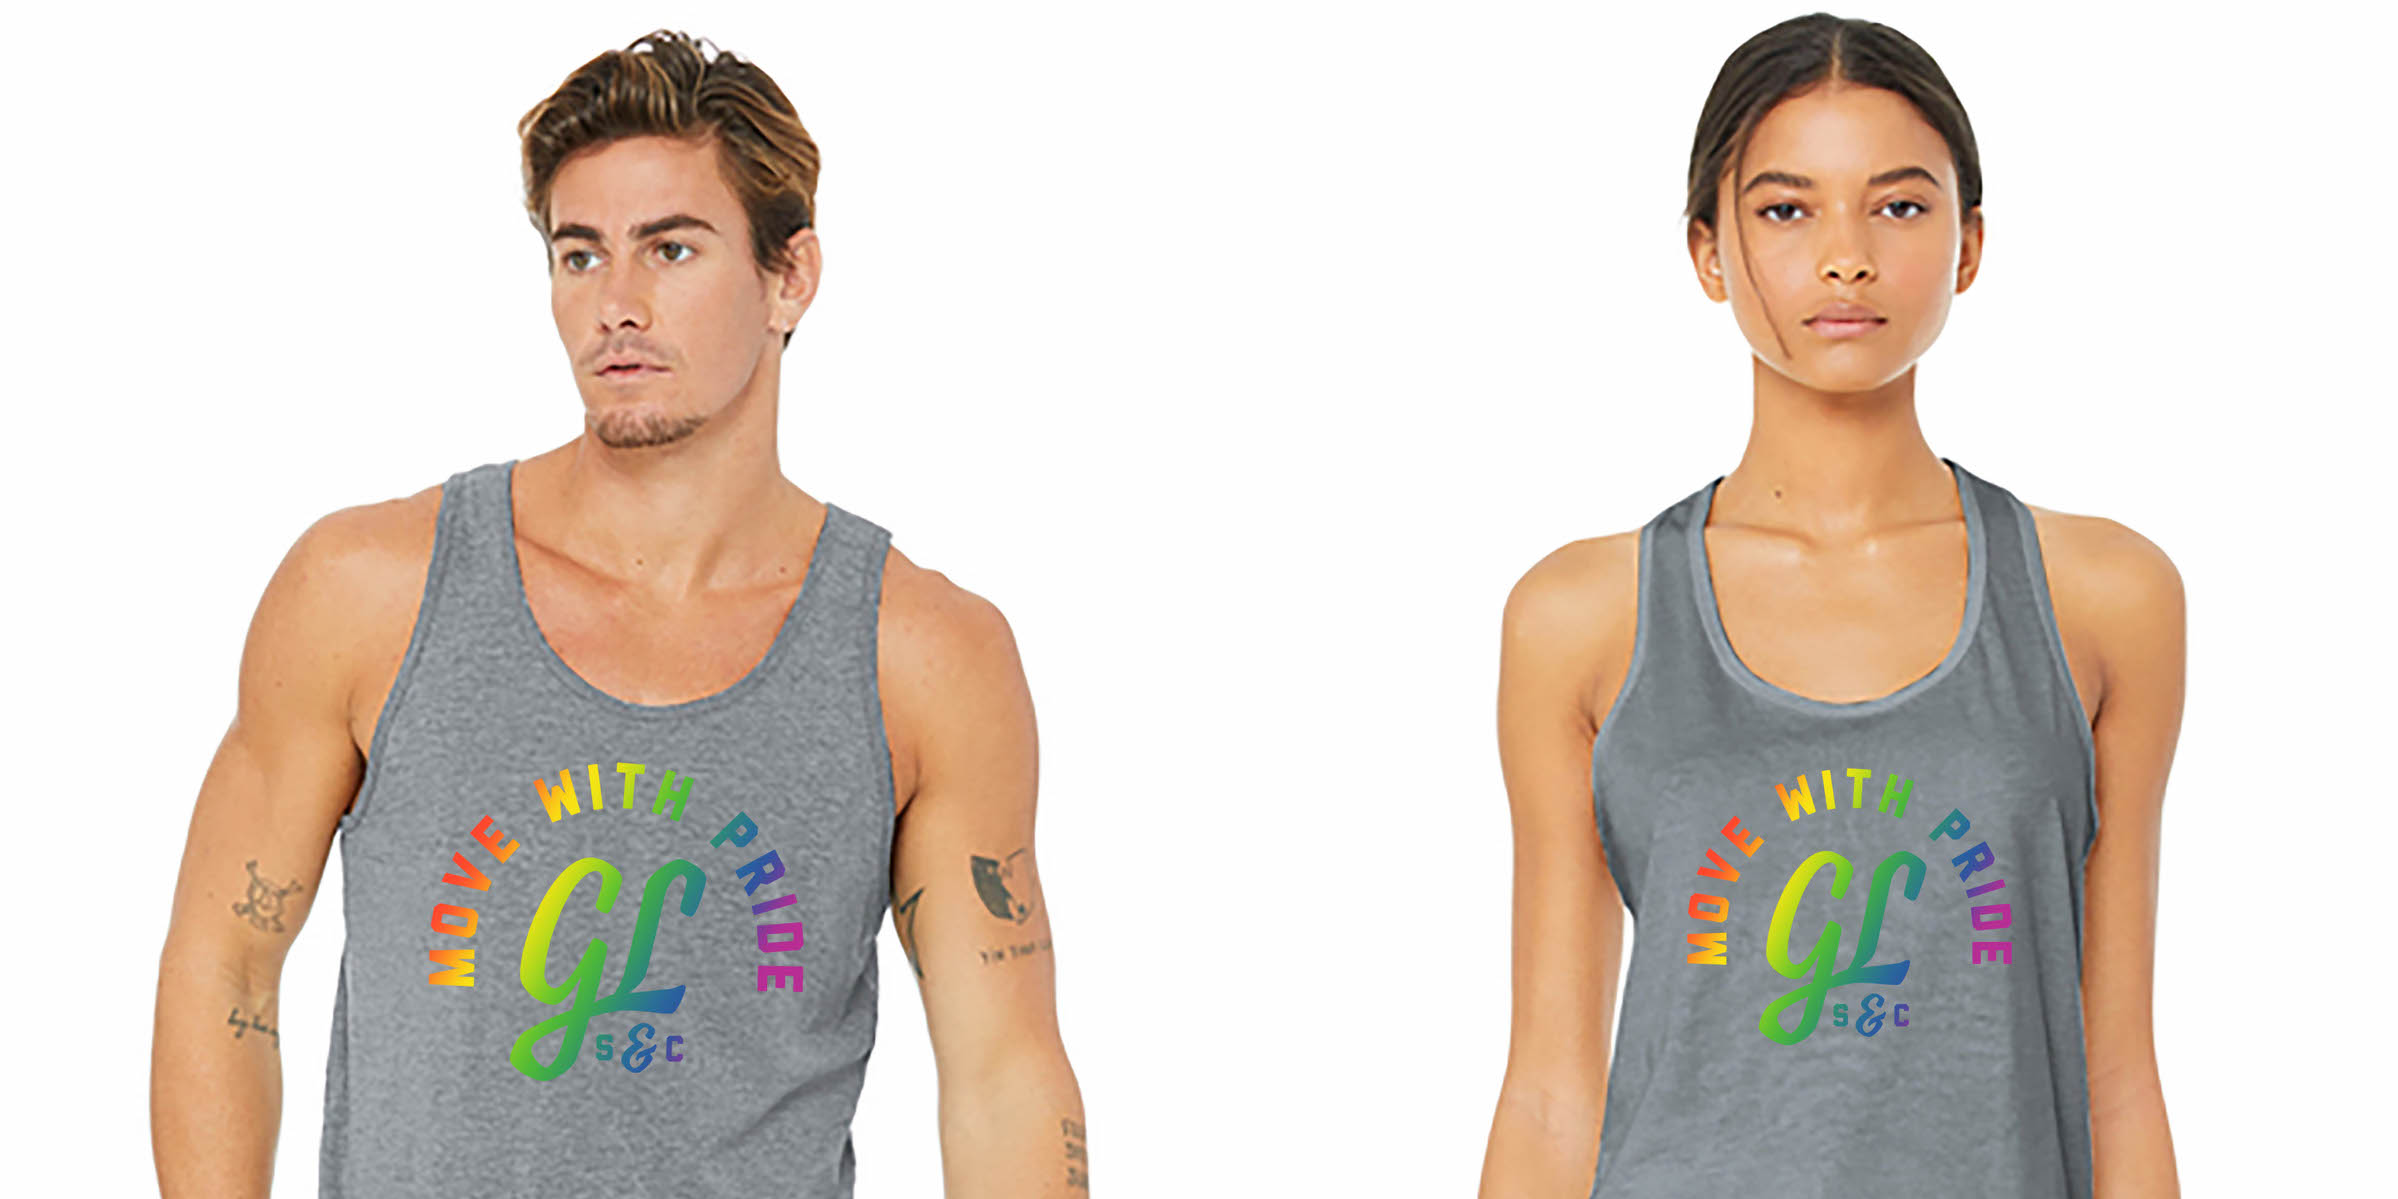 You are currently viewing Pre-order your GLSC pride tank supporting the Lambert House